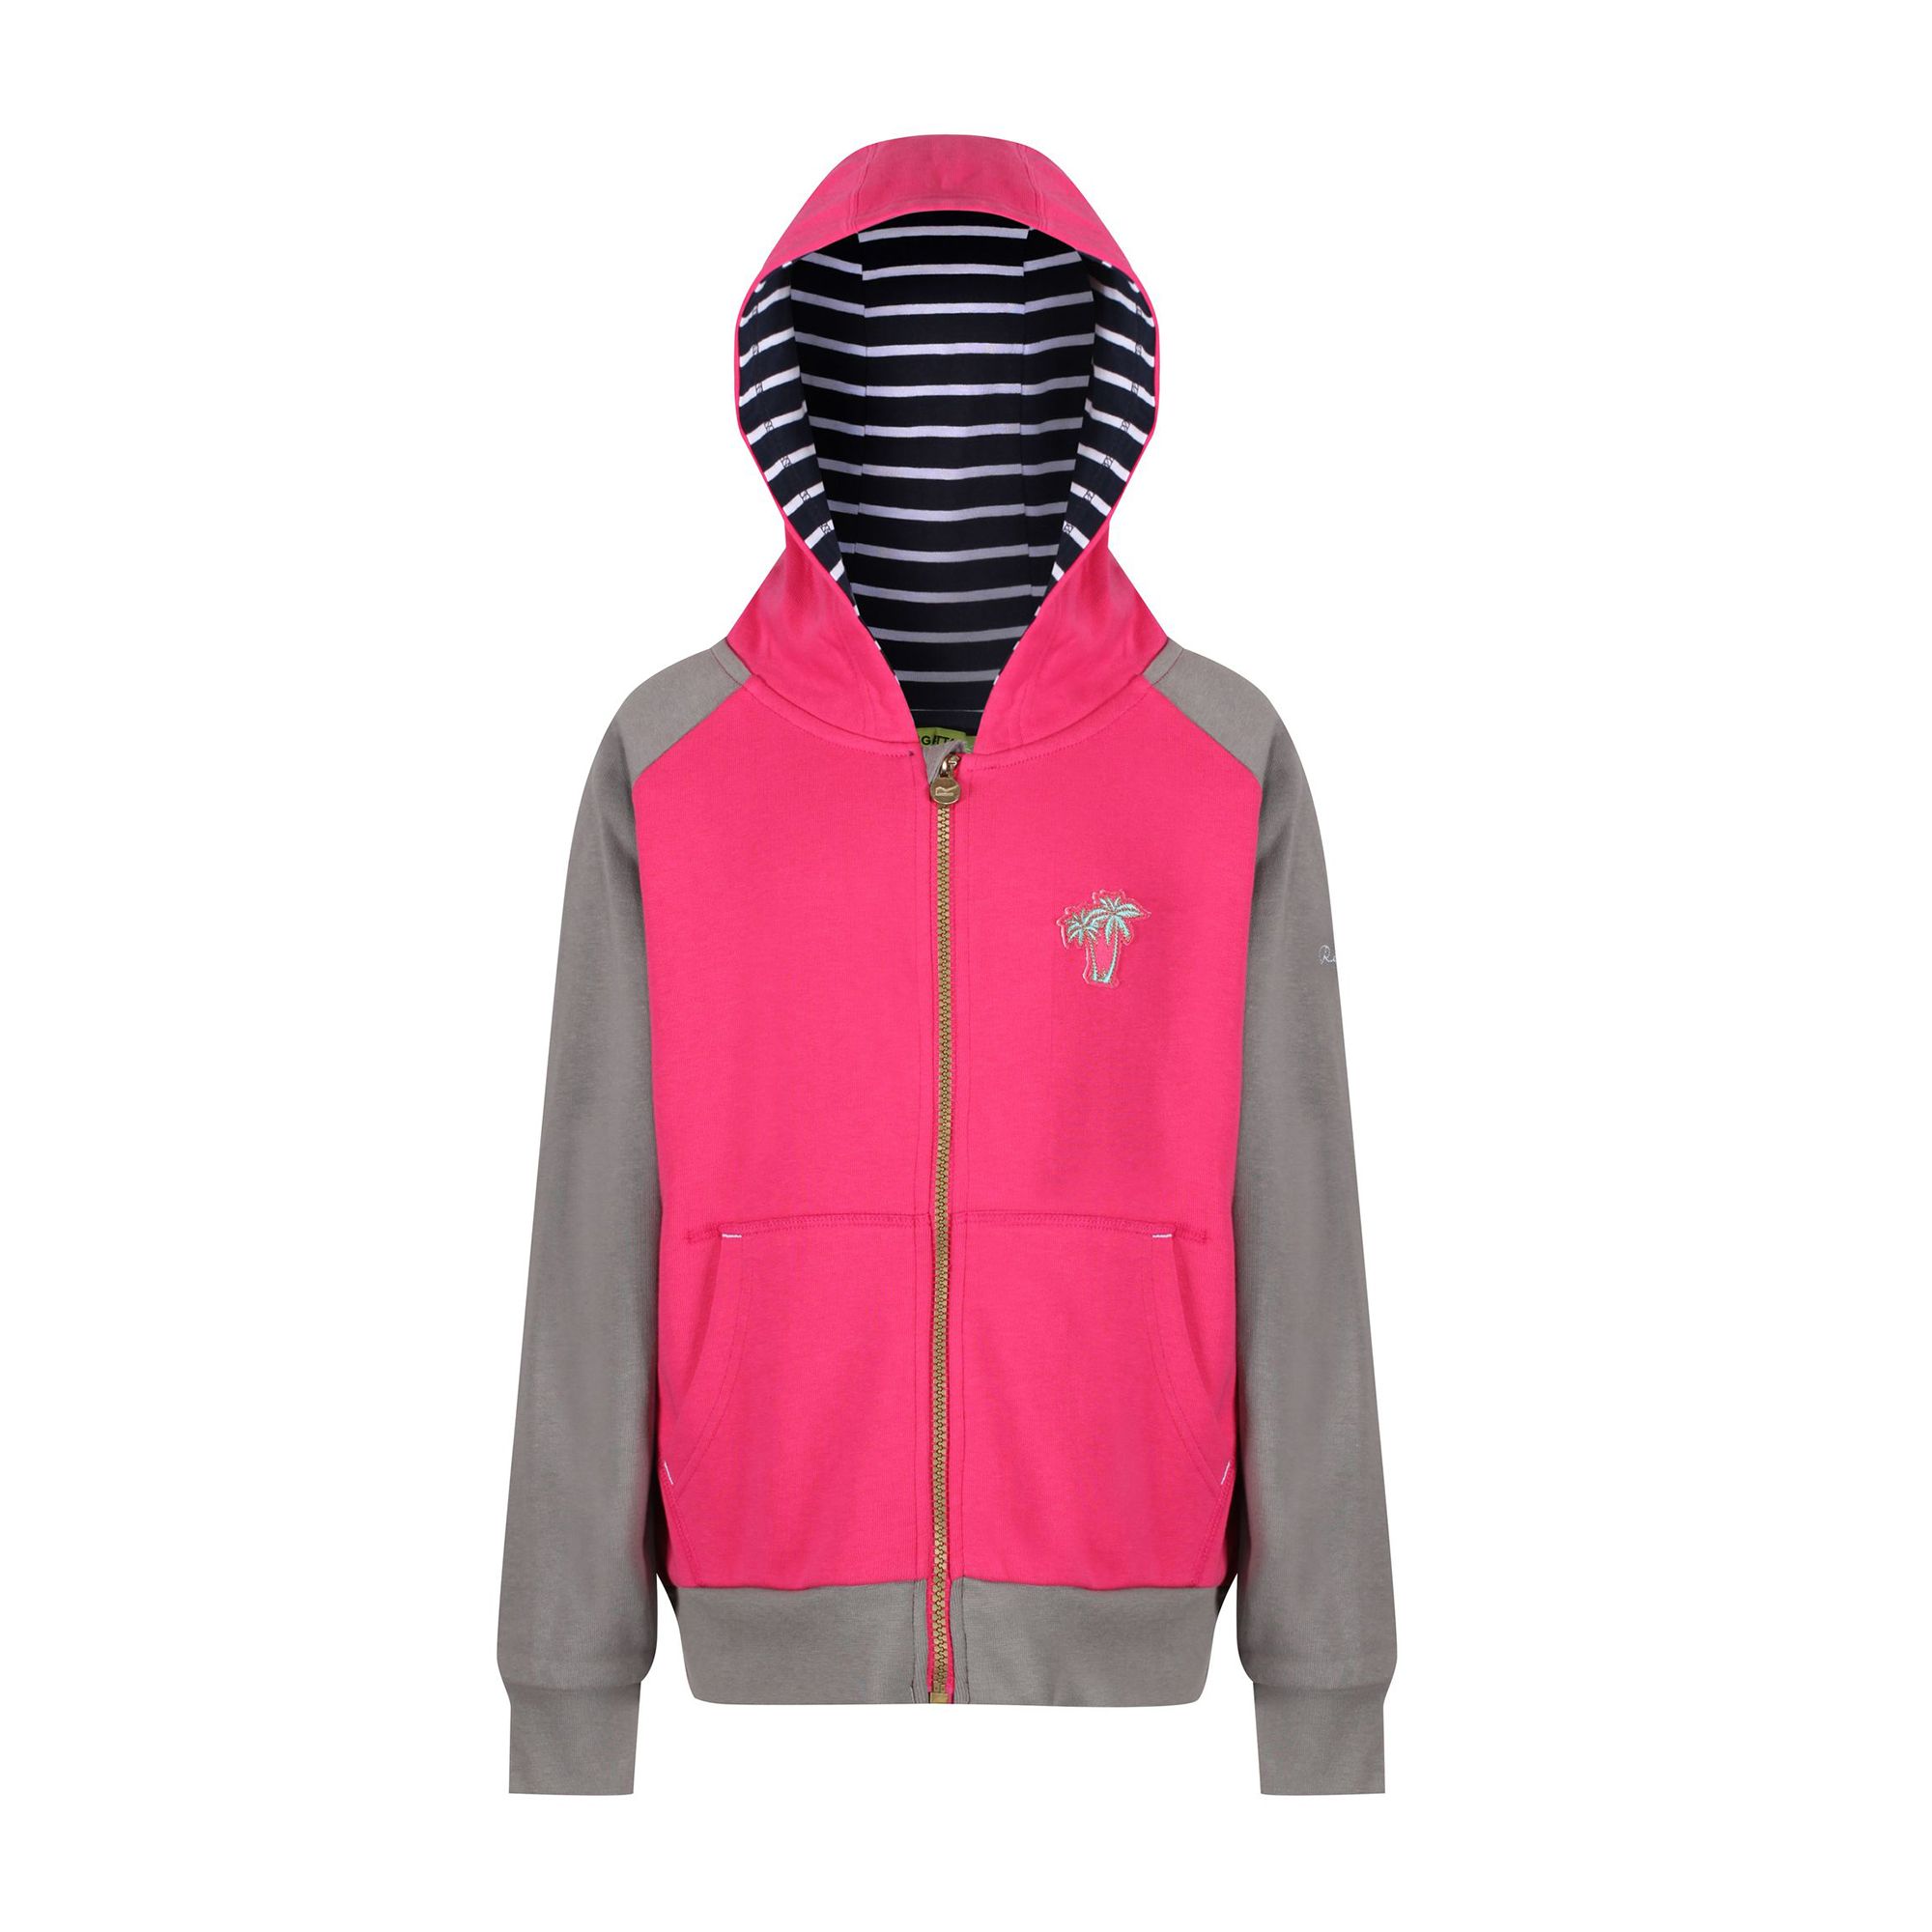 65% Polyester, 35% Cotton. Tetra hoodie for children. Full zip. Features two side pockets. Long sleeves to keep you warm.